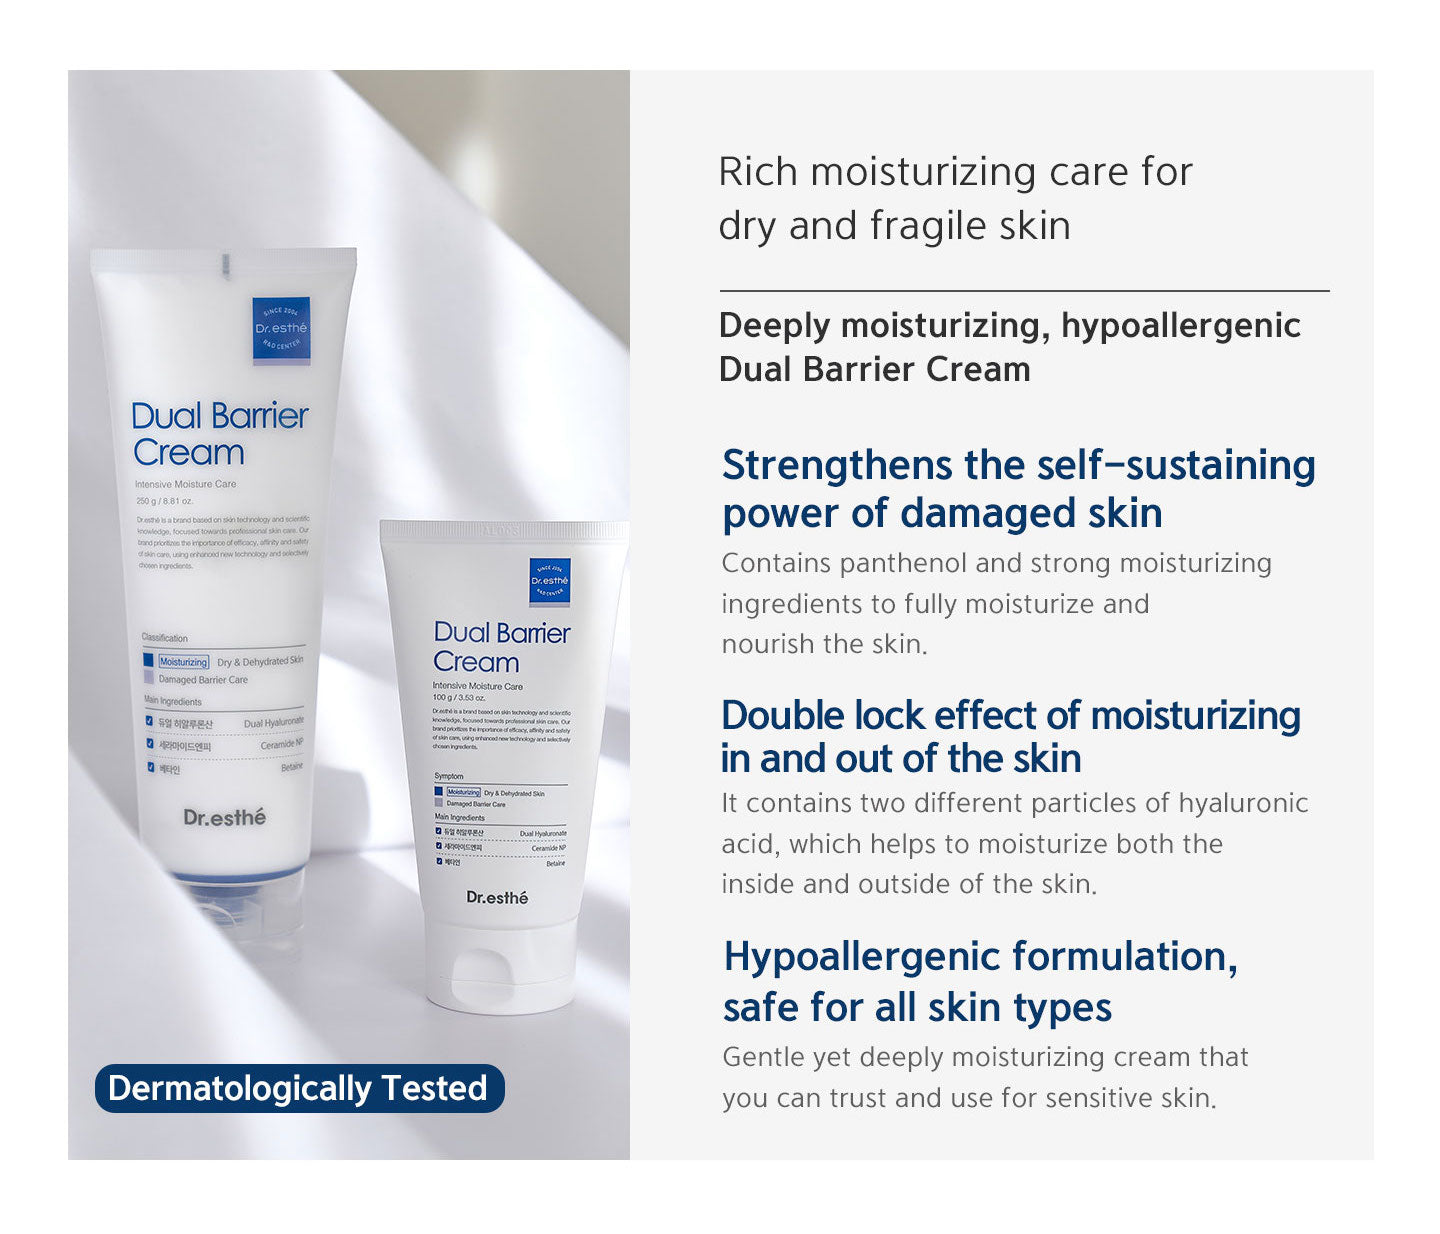 Rich moisturizing care for dry and fragile skin. Deeply moisturizing, hypoallergenic dual barrier cream. Strengthens the self-sustaining power of damaged skin. Double lock effect of moisturizing in and out of the skin. Hypoallergenic formulation, safe for